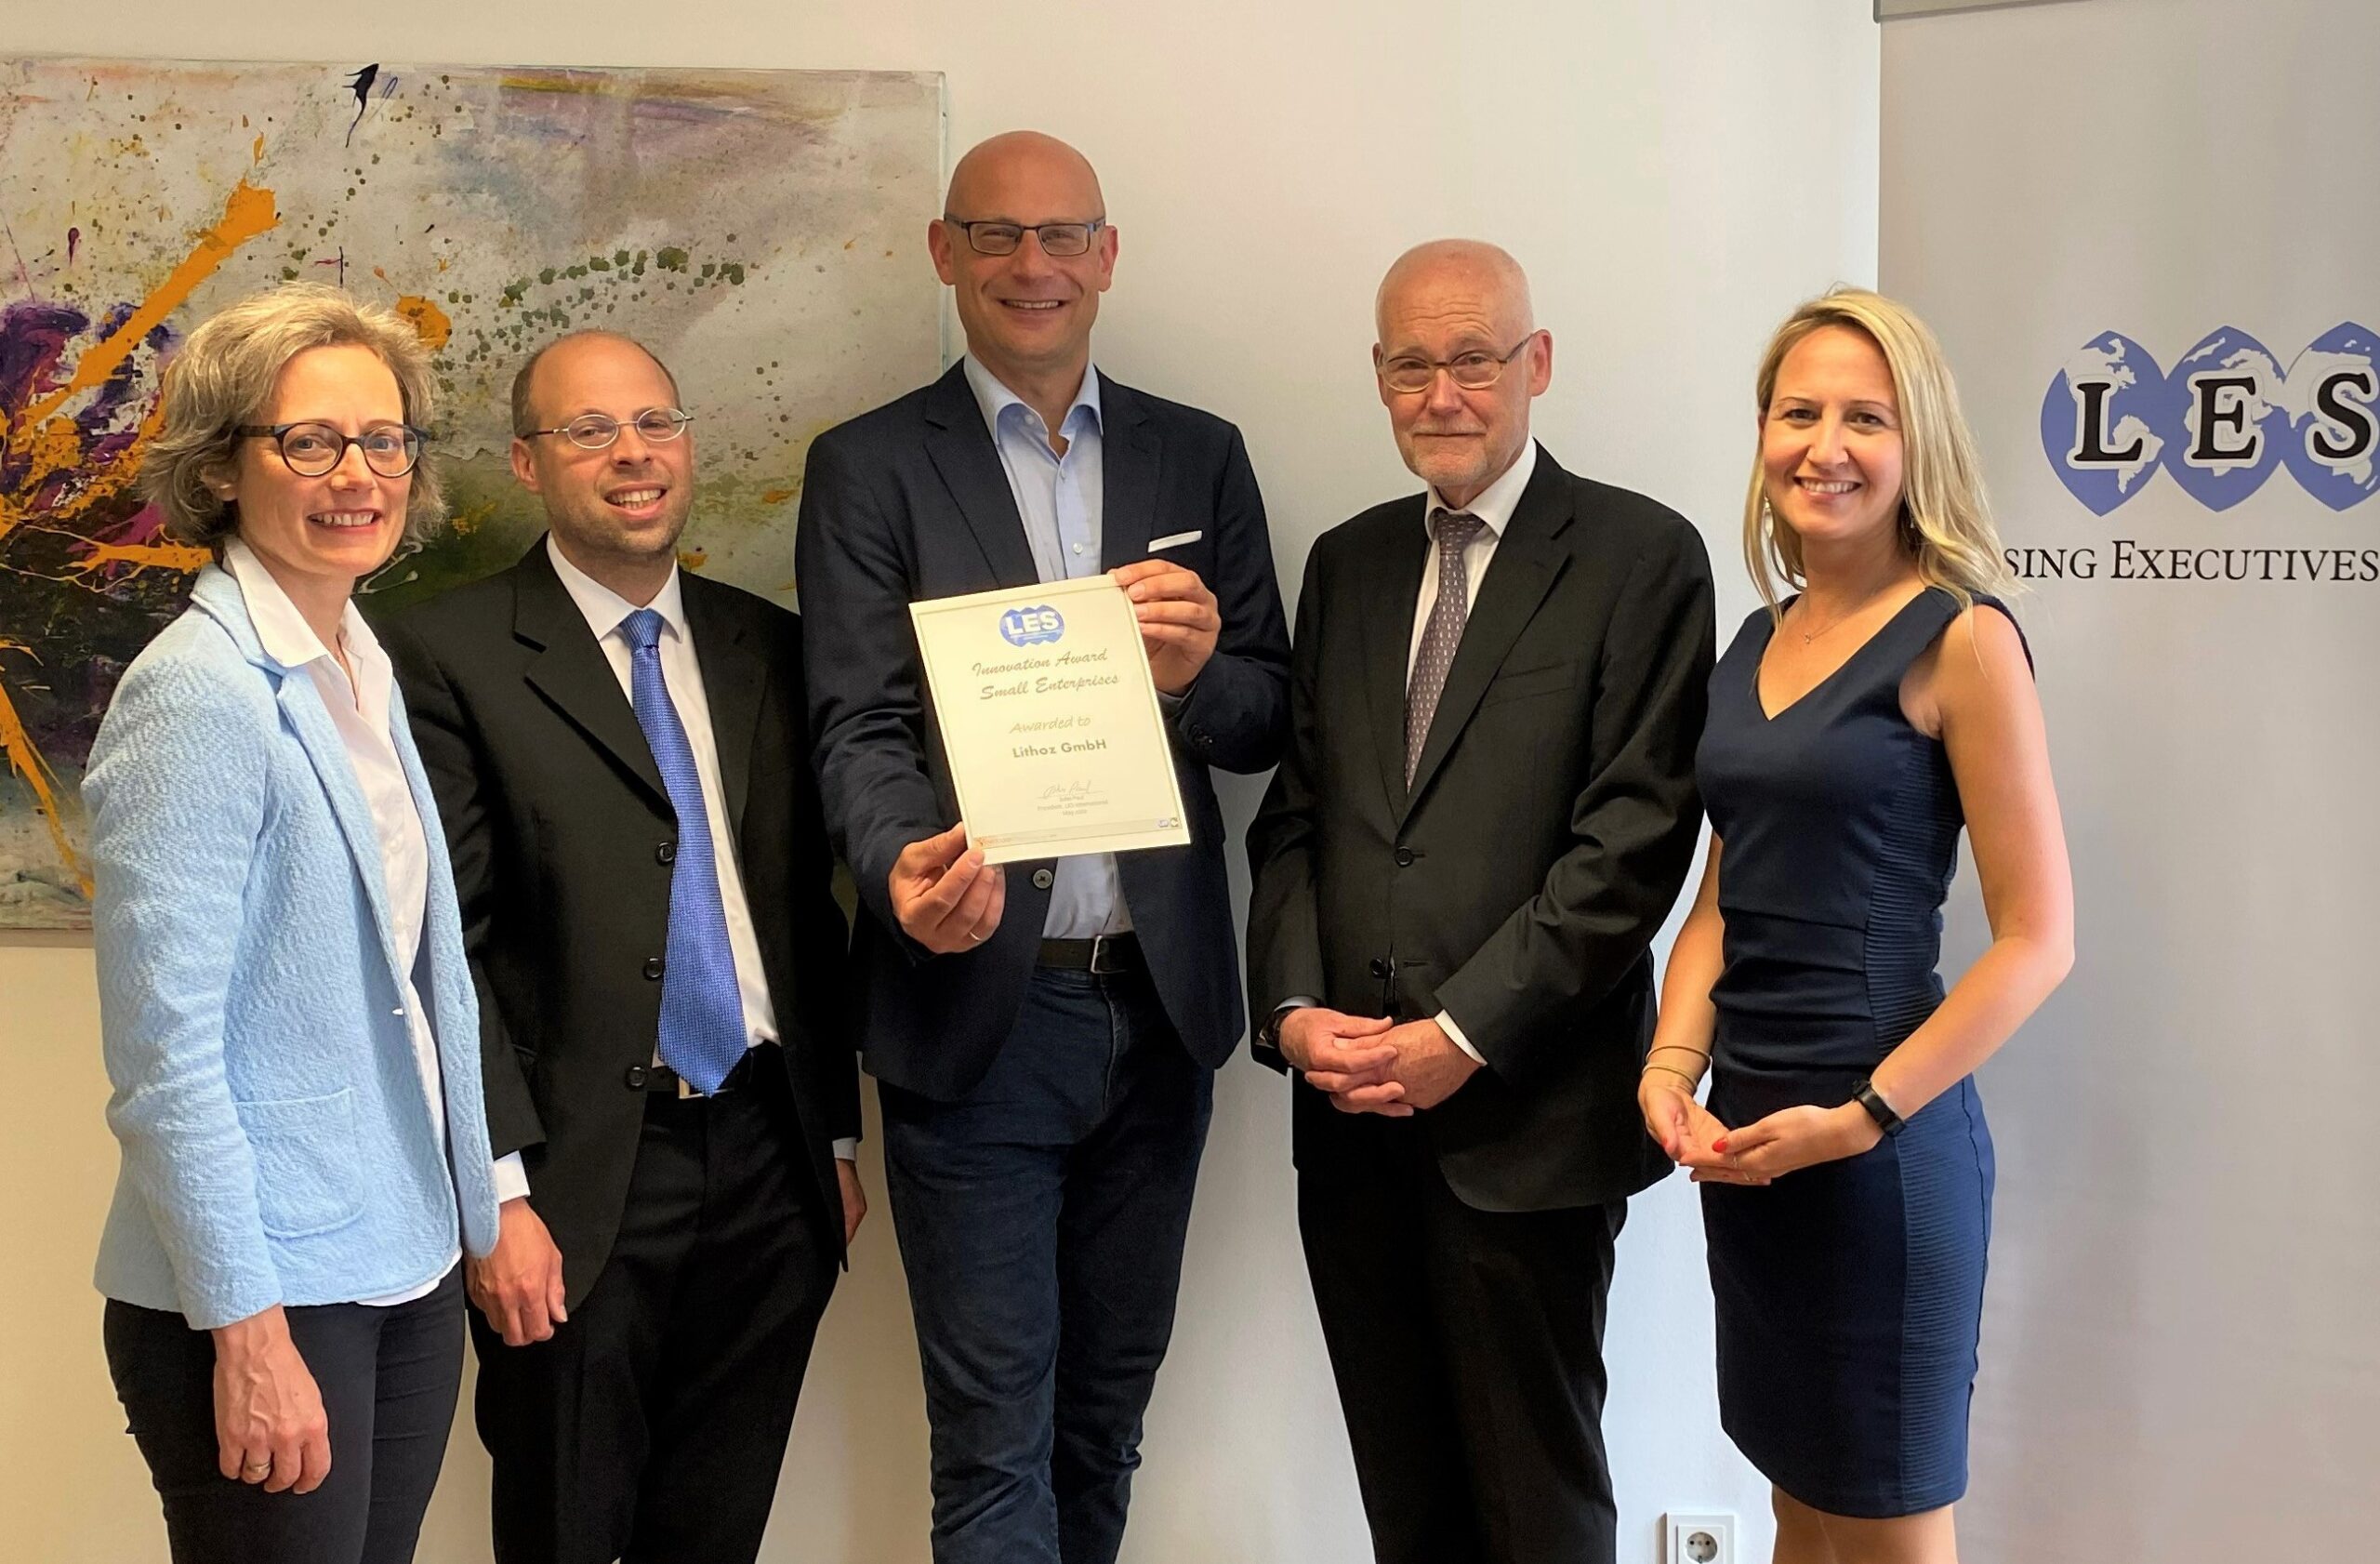 Lithoz voted as winner by Licensing Executive Society International (LESI)